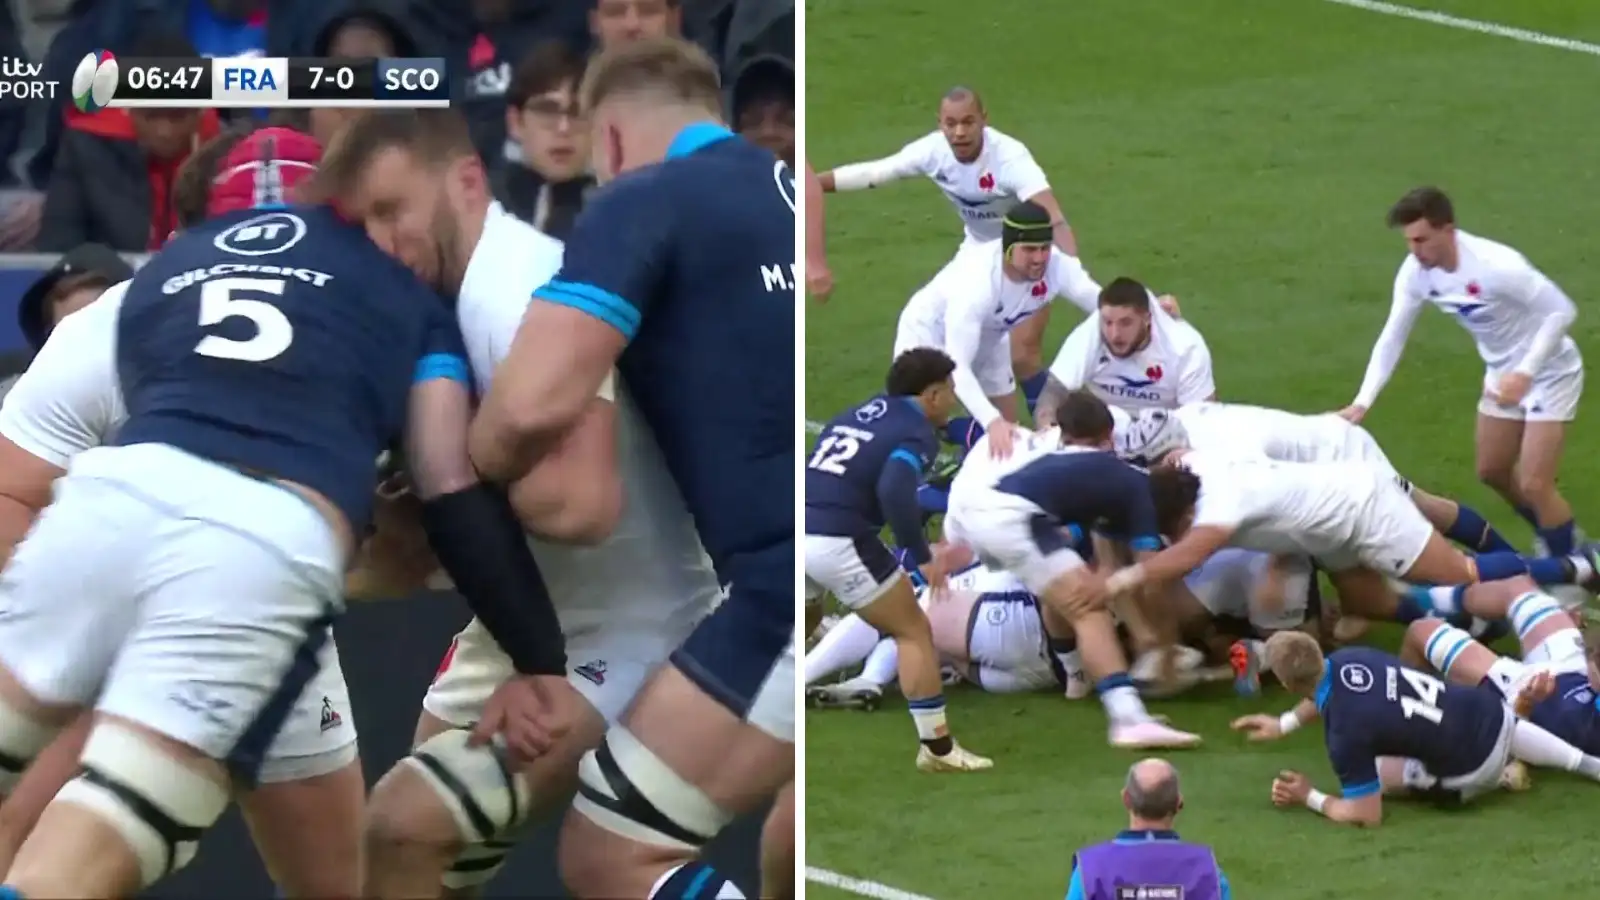 Scotland vice-captain Grant Gilchrist was given his marching orders just seven minutes into the Six Nations clash against France on Sunday, with Les Bleus' prop Mohamed Haouas following soon after.